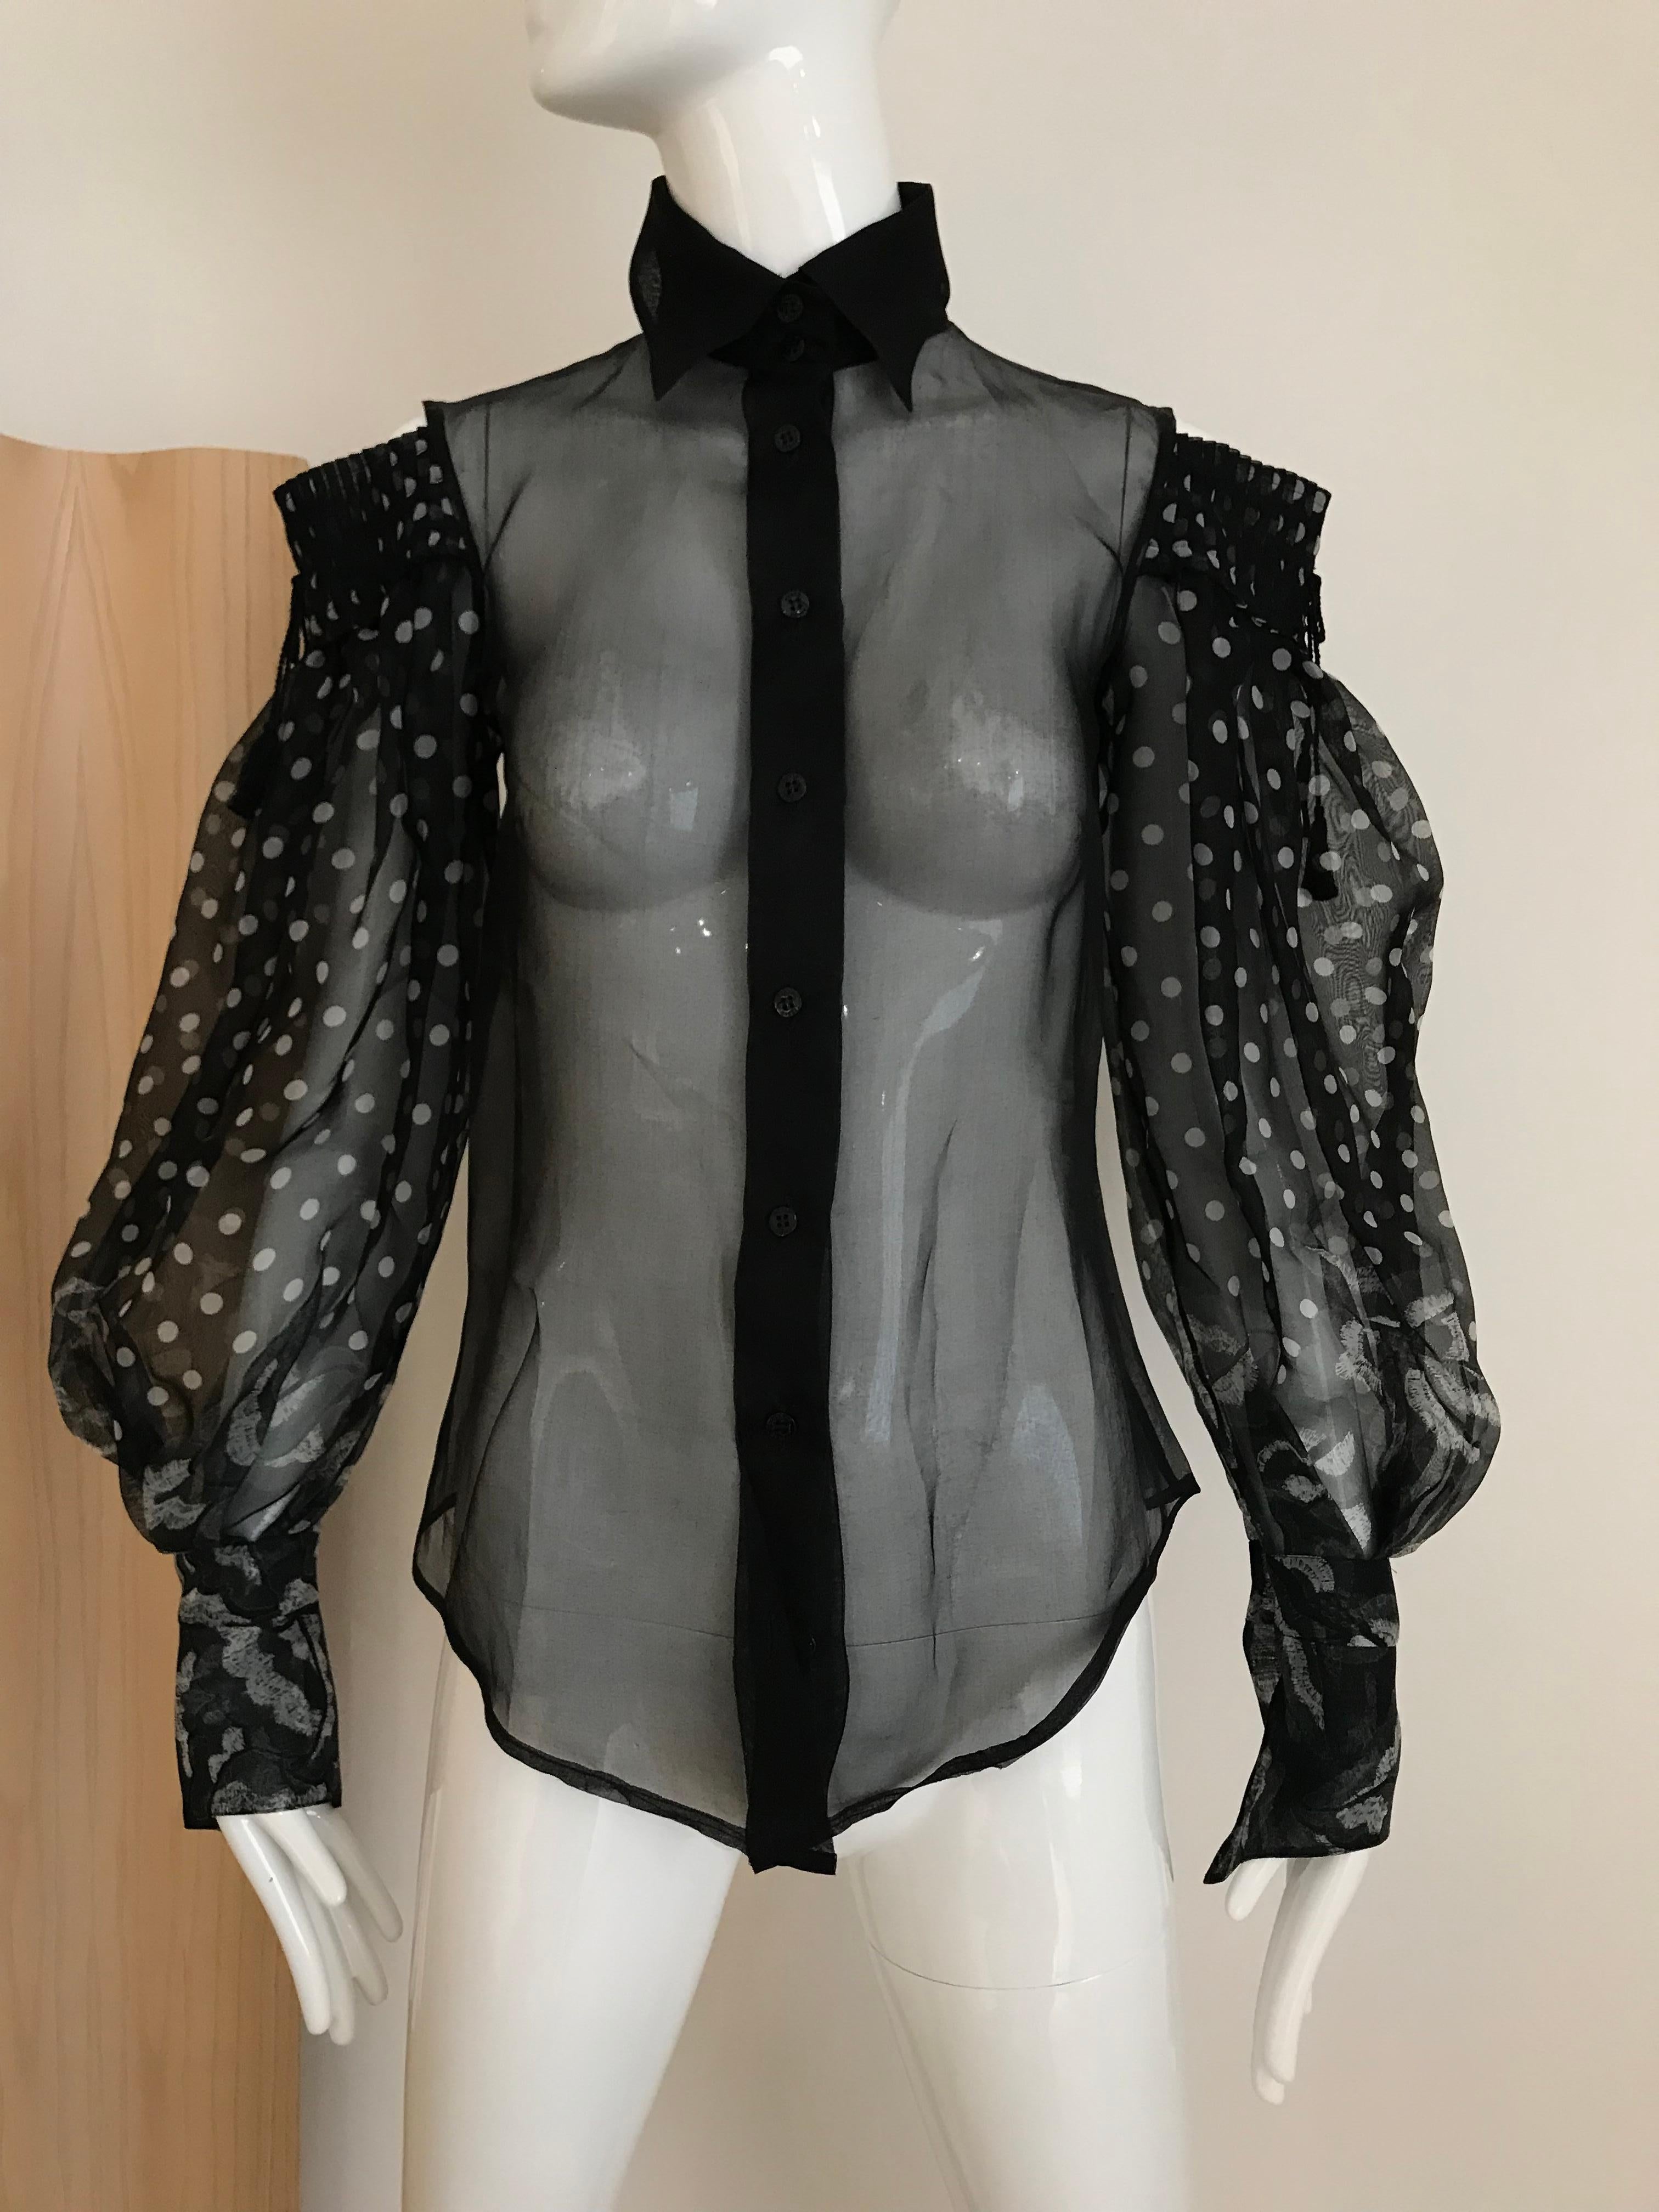 Gianfranco Ferre Sheer Black polkadot Silk blouse with dramatic sleeves
Size: small
Bust: 34 inches